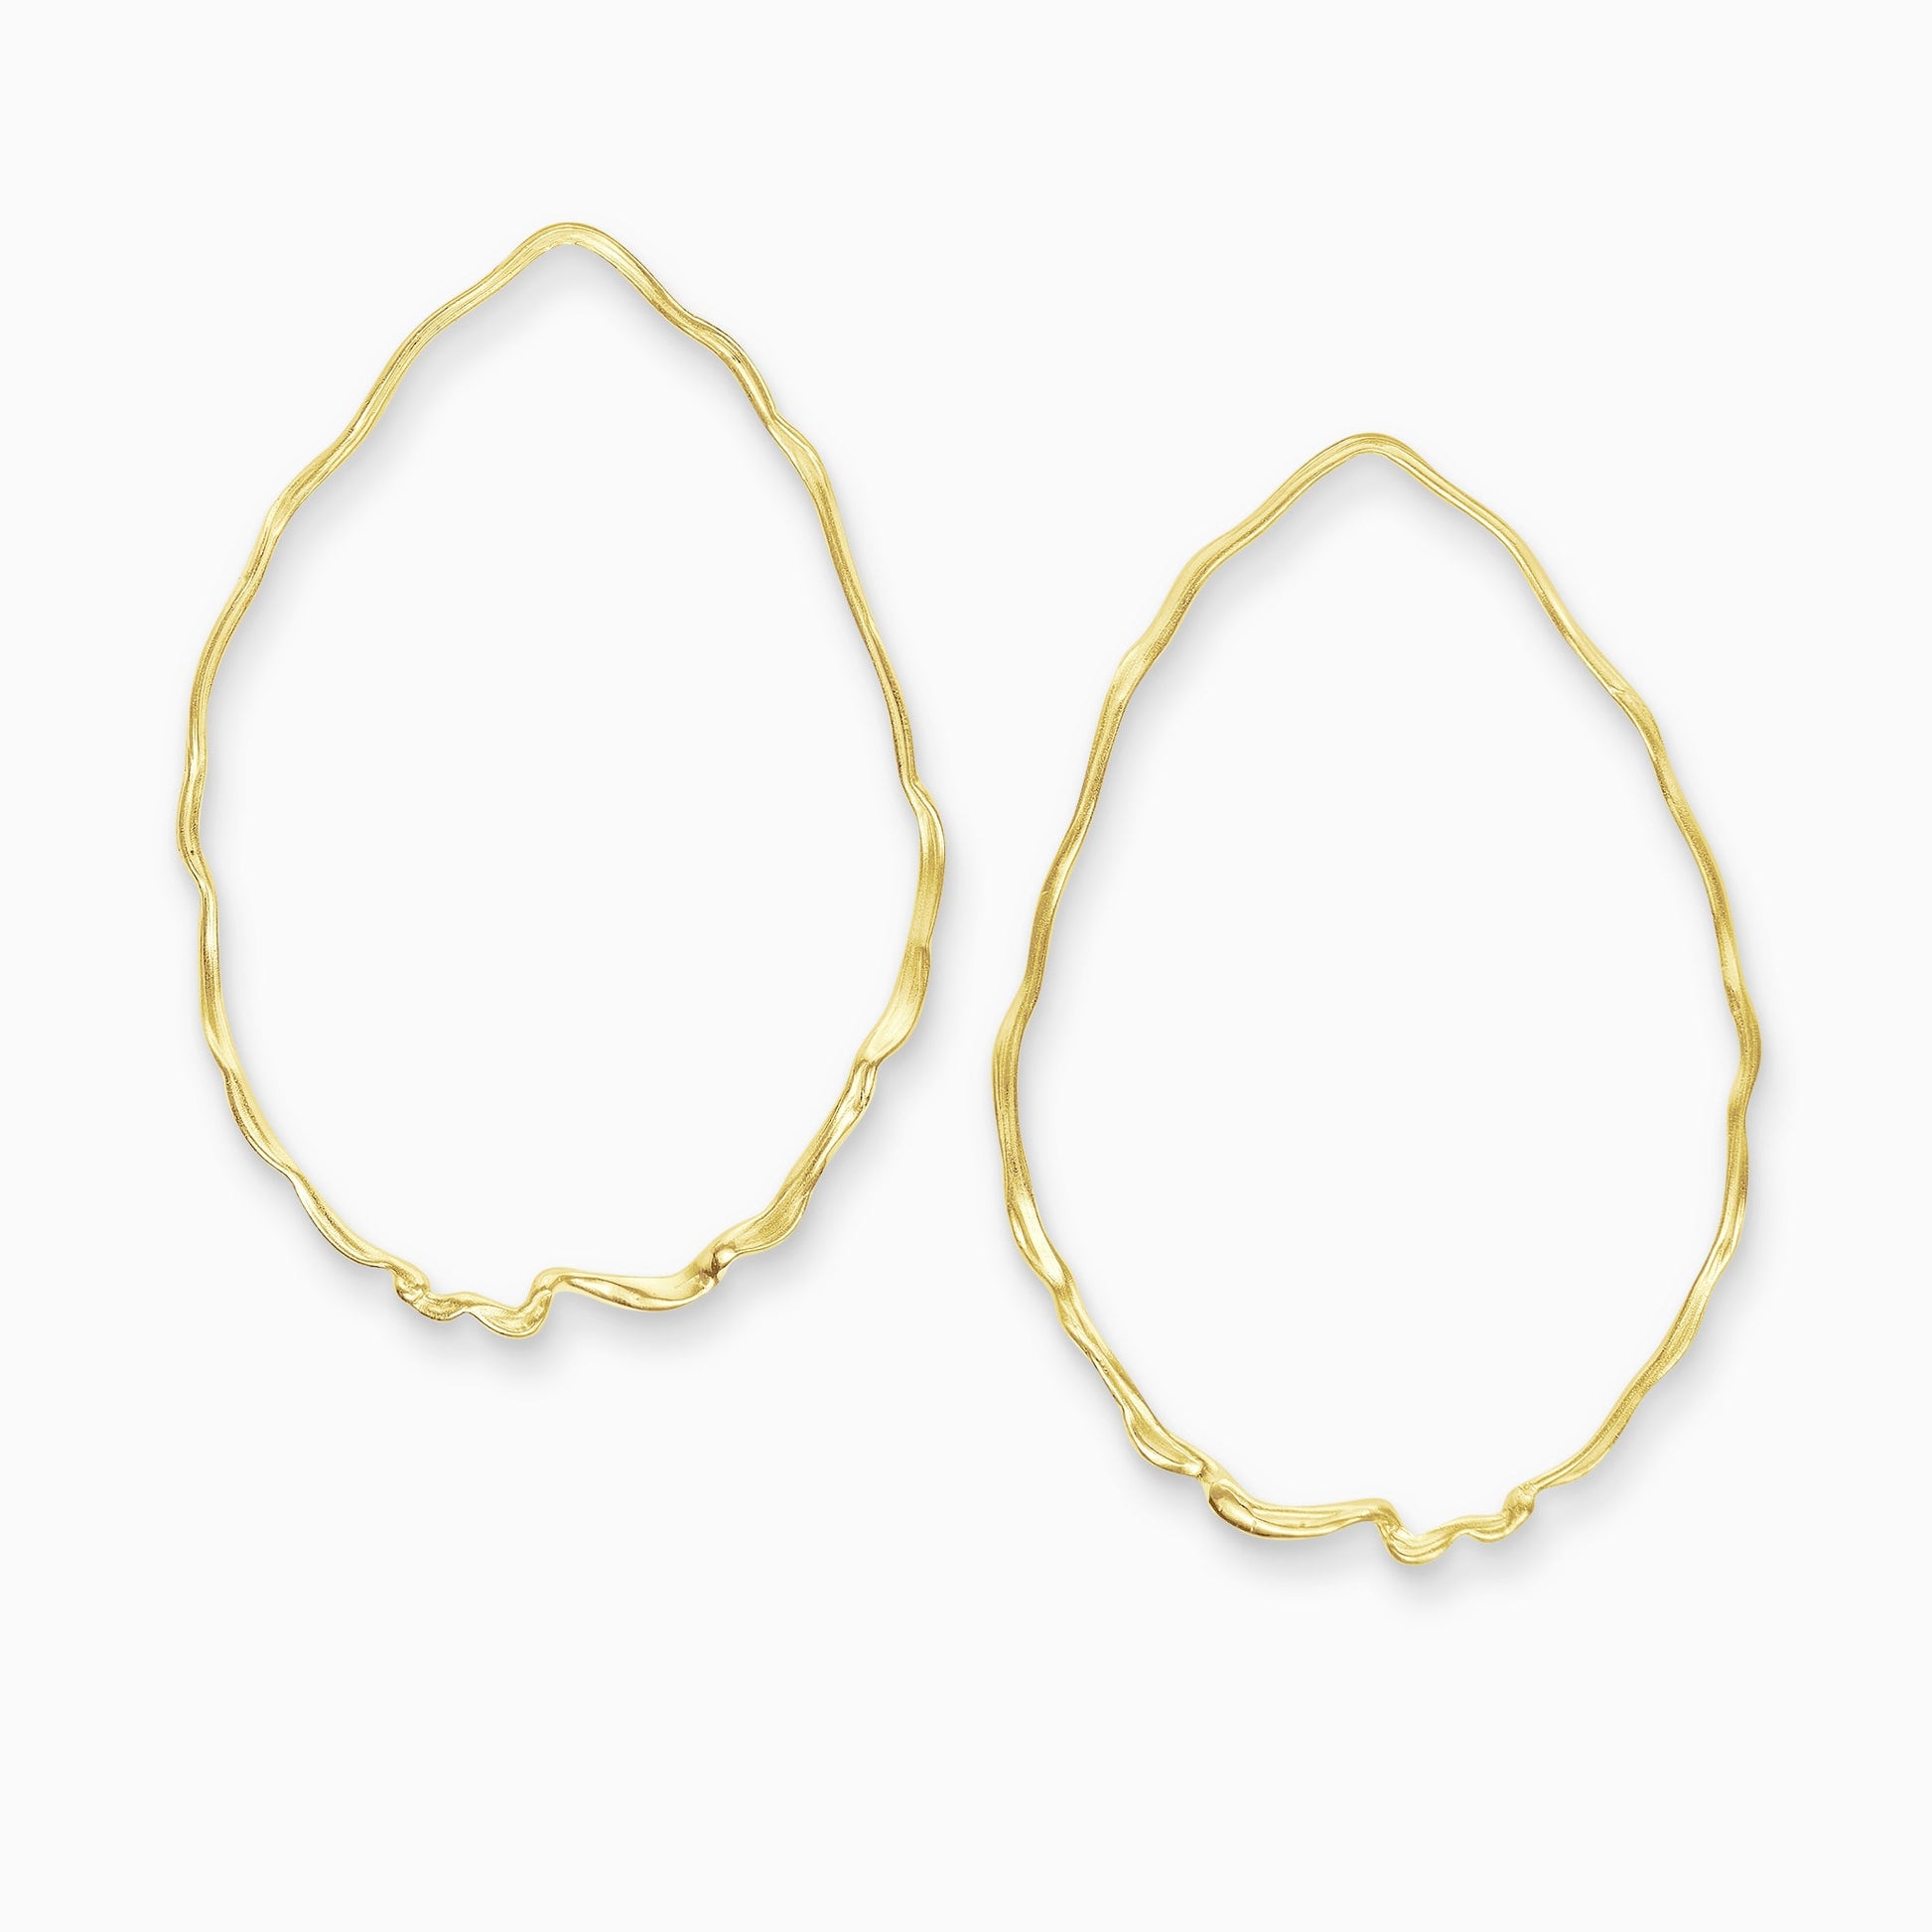 A pair of 18ct Fairtrade yellow gold large teardrop shaped earrings with a stud fastening. A fine undulating irregular and organically textured wire forms the large teardrop shape. 75mm x 50mm